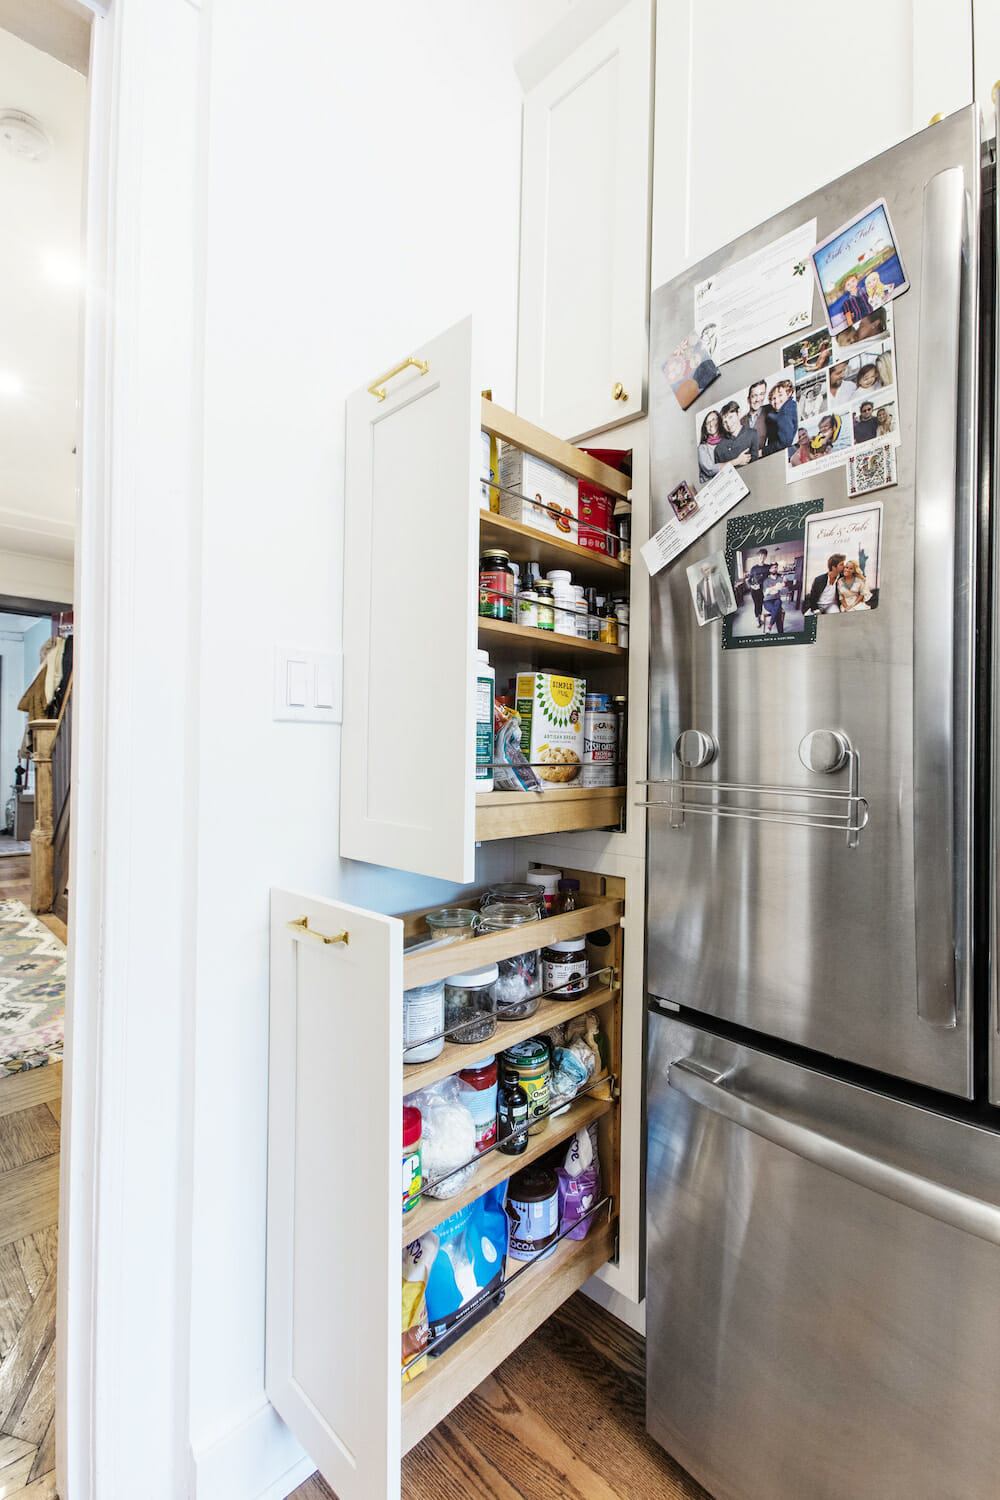 white kitchen cabinets wrapping around refrigerator and pull-out pantry or cabinets after renovation